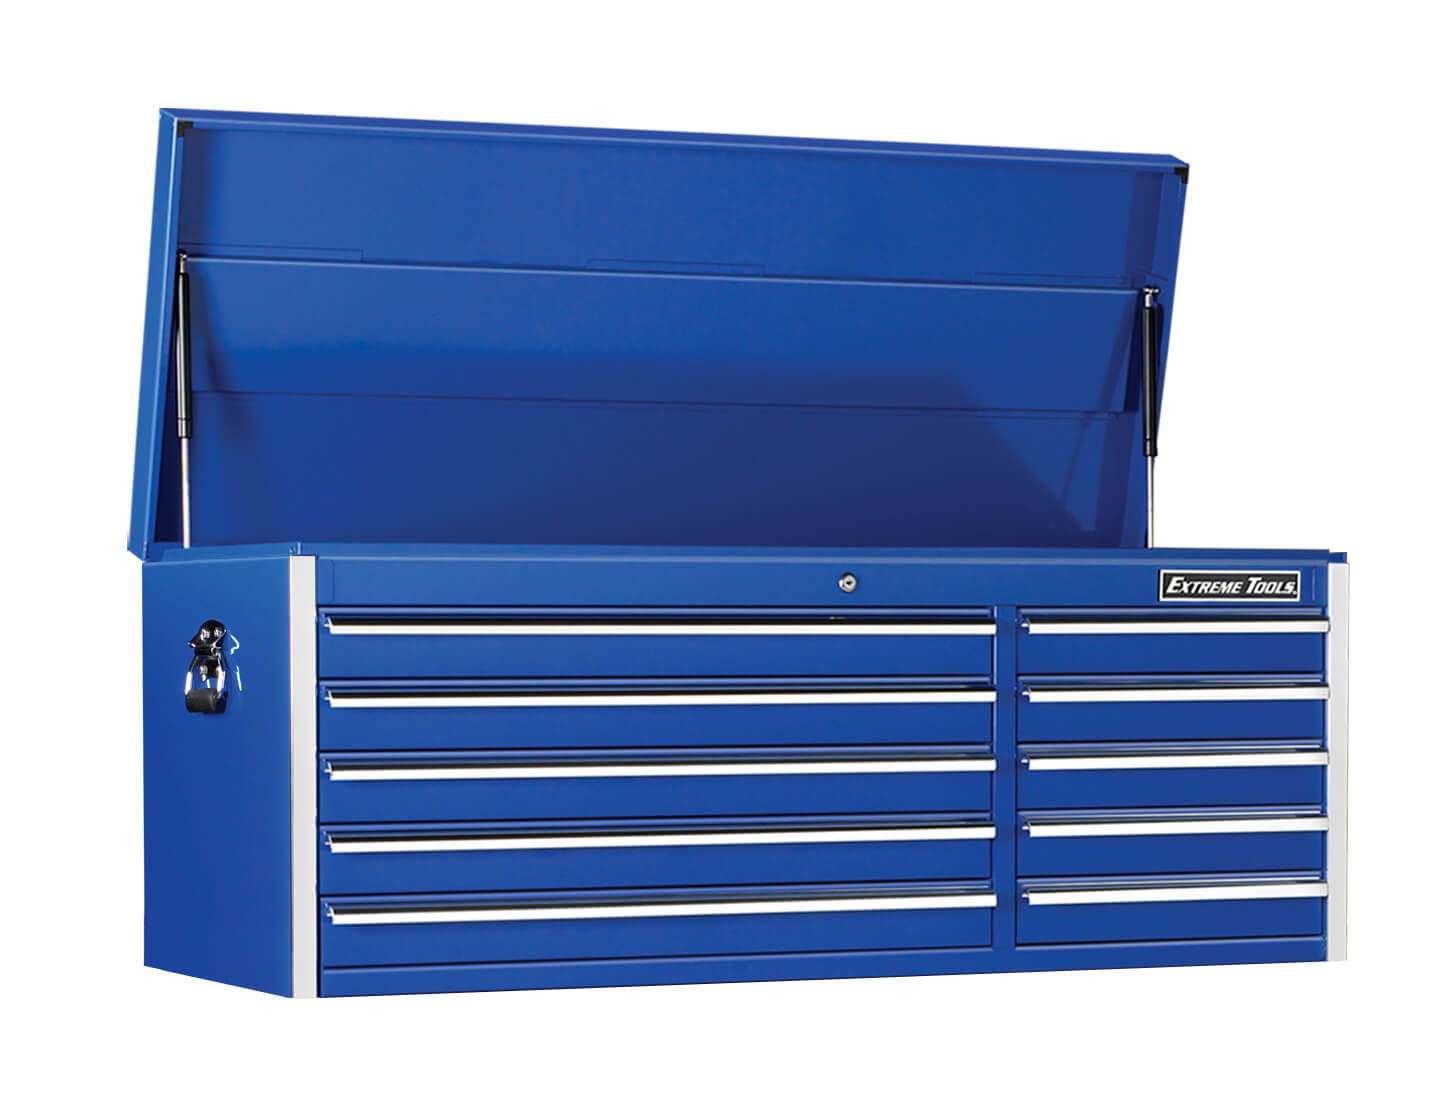 EXTREME TOOLS® 56 inch 10 DRAWER STANDARD TOOL CHEST